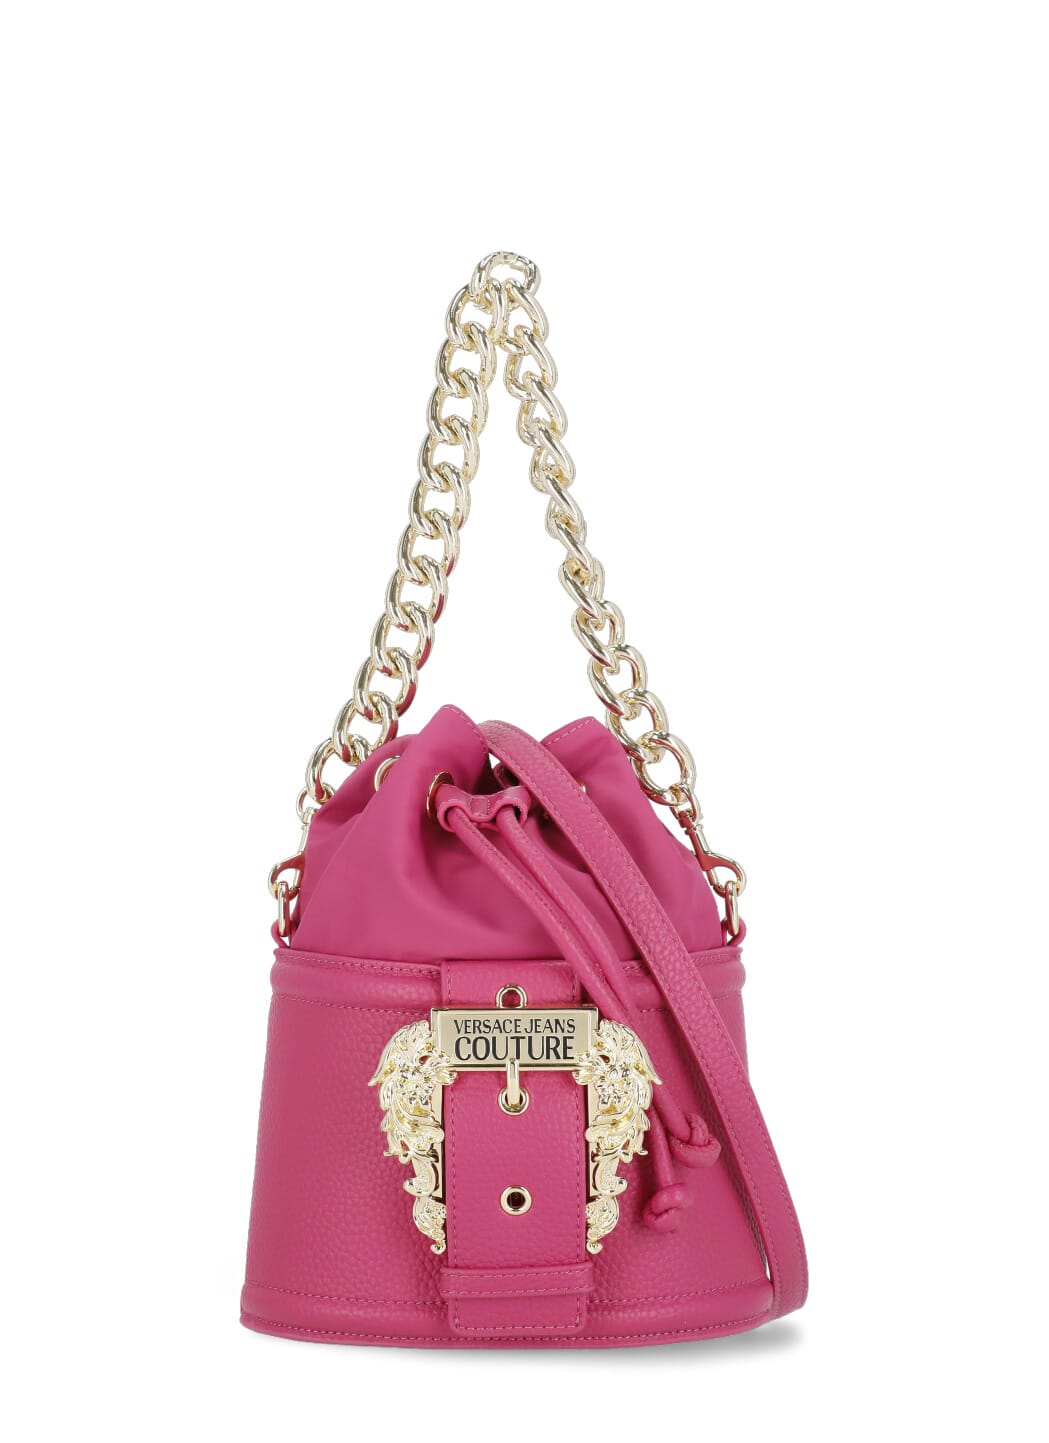 Versace Jeans Couture Handbag With Baroque Buckle In Pink